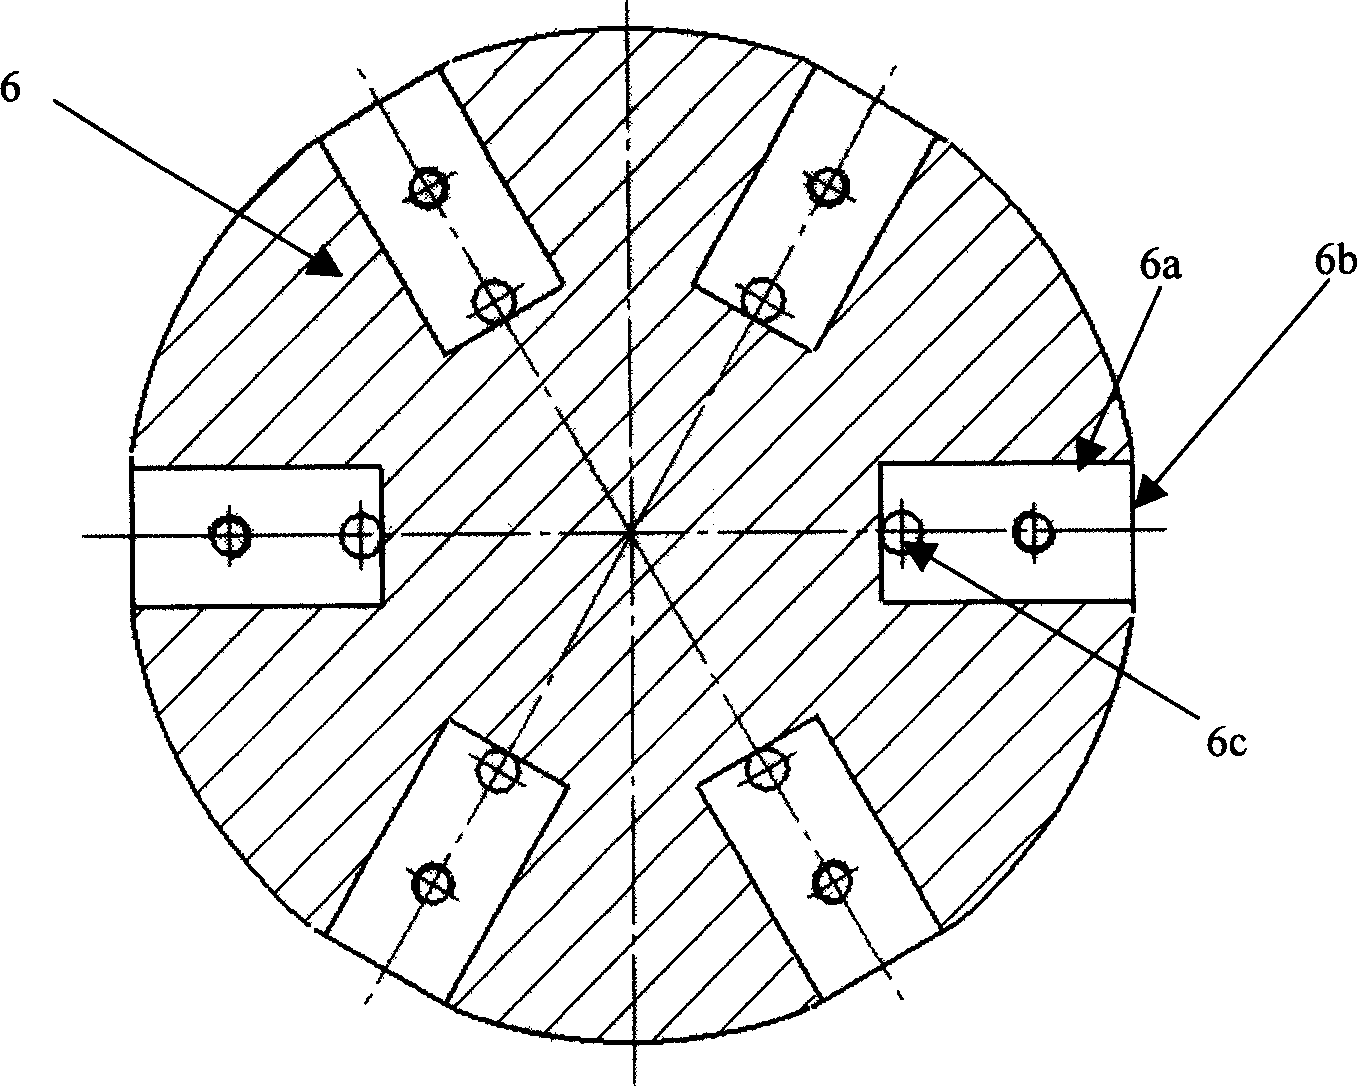 One division cam mechanism with cambered surface